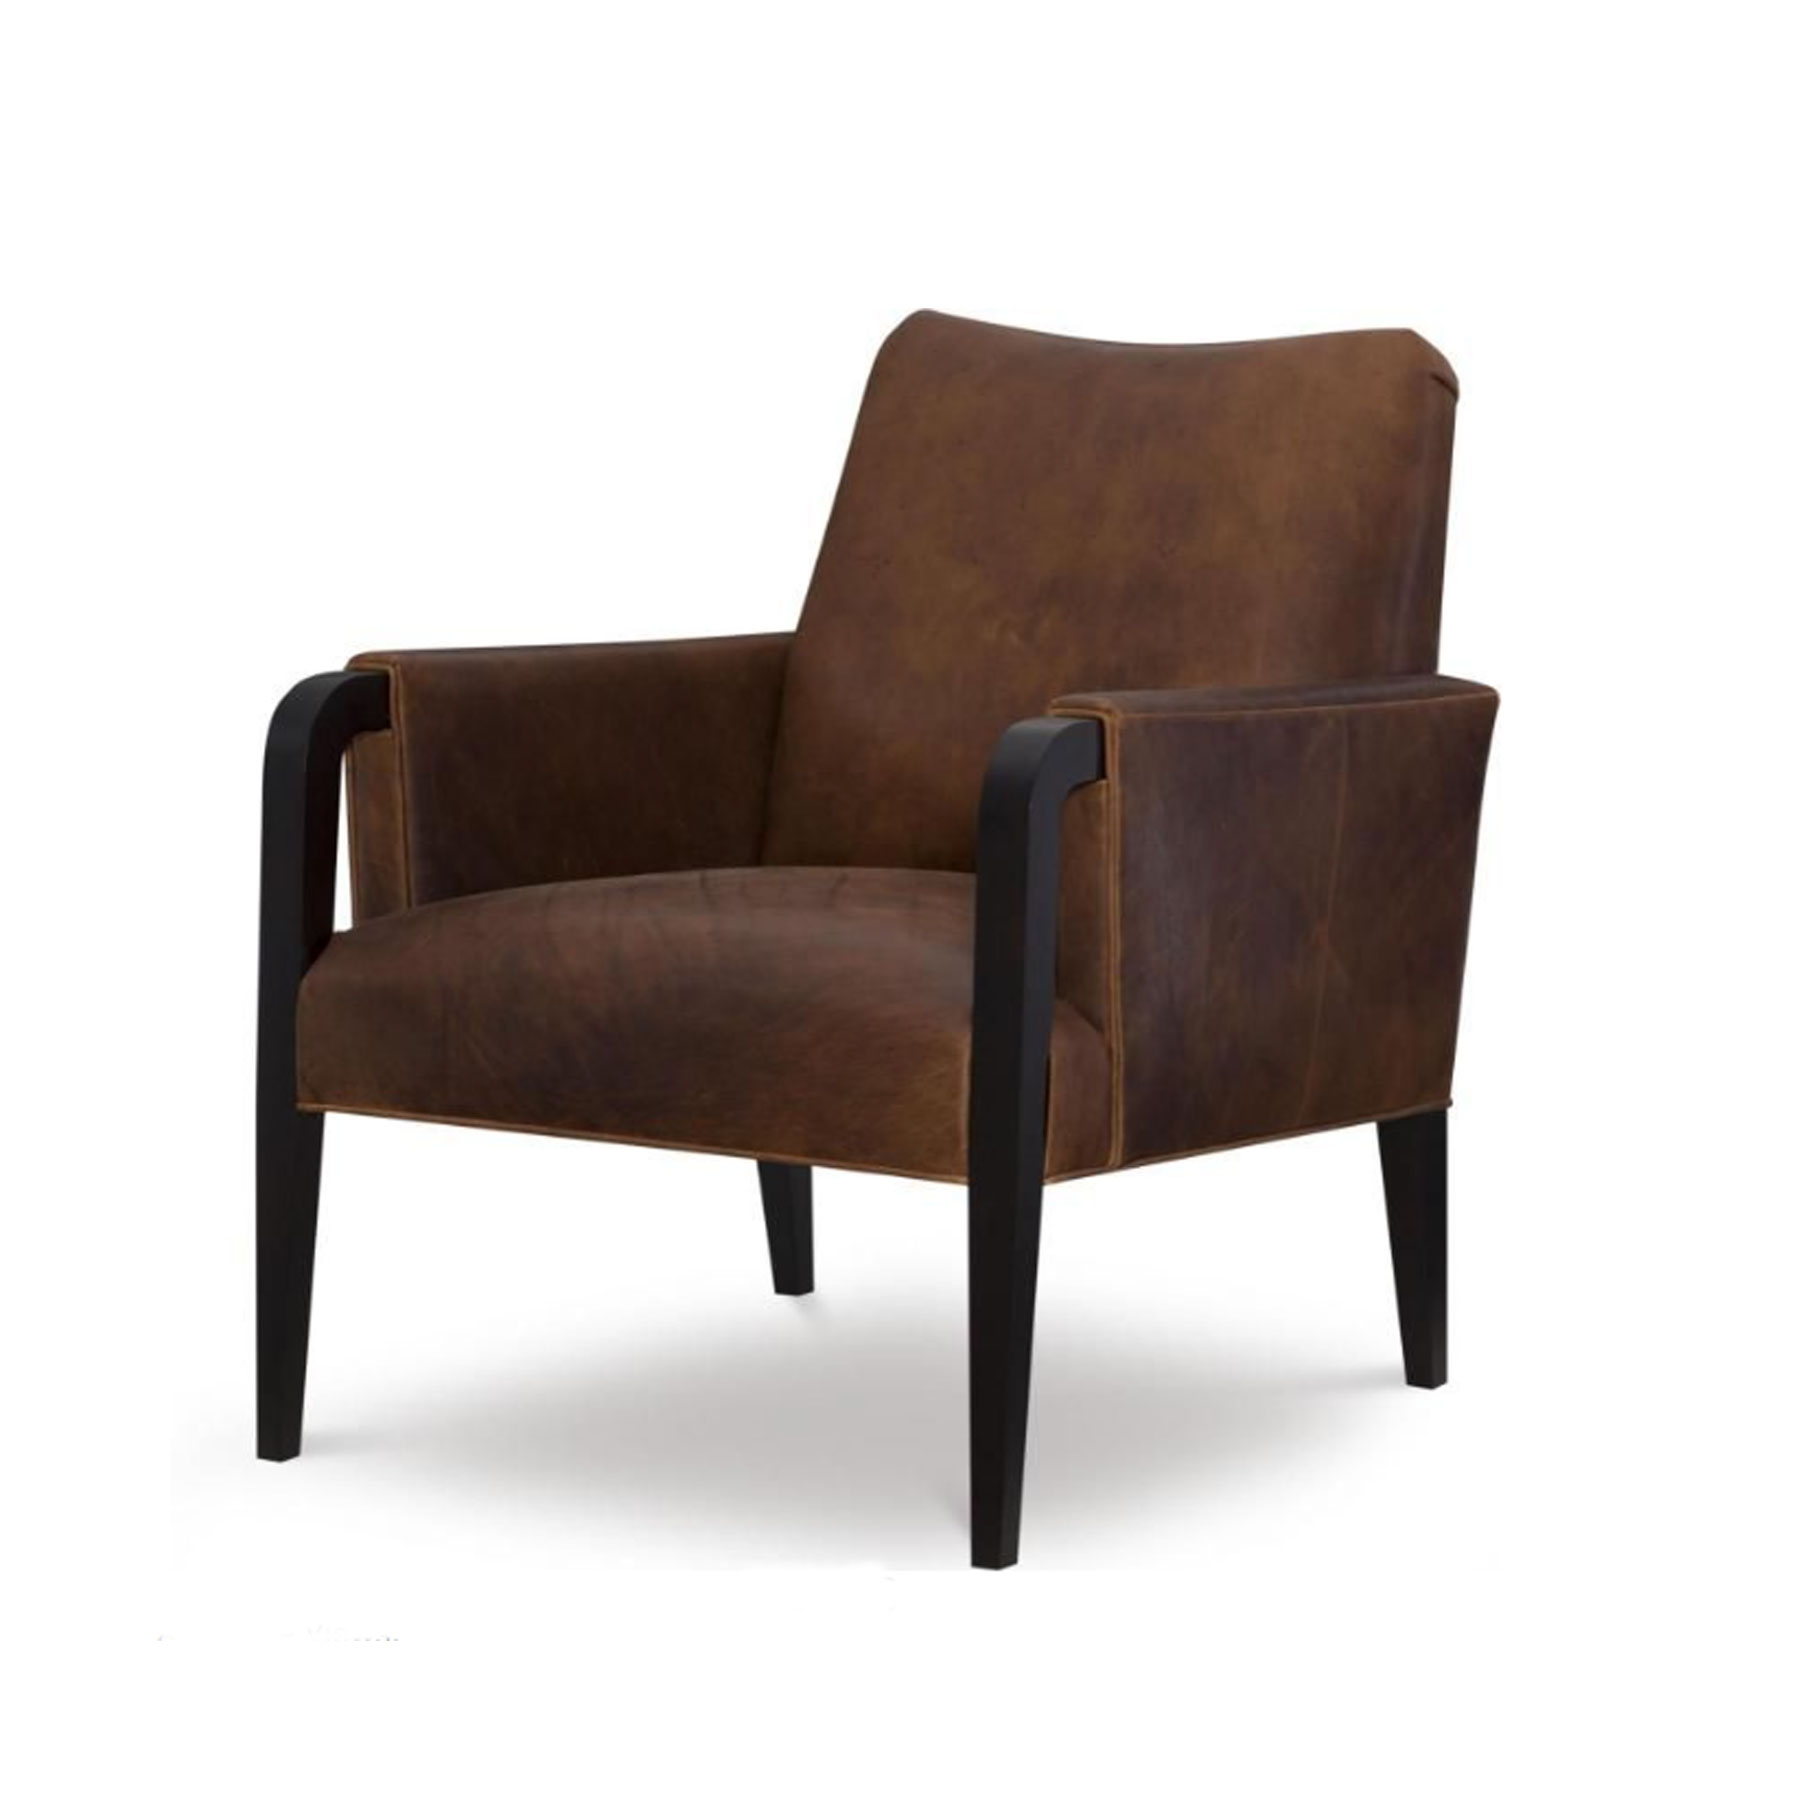 Wesley Hall PL549 Tusk Chair in Crockett Chimney Leather